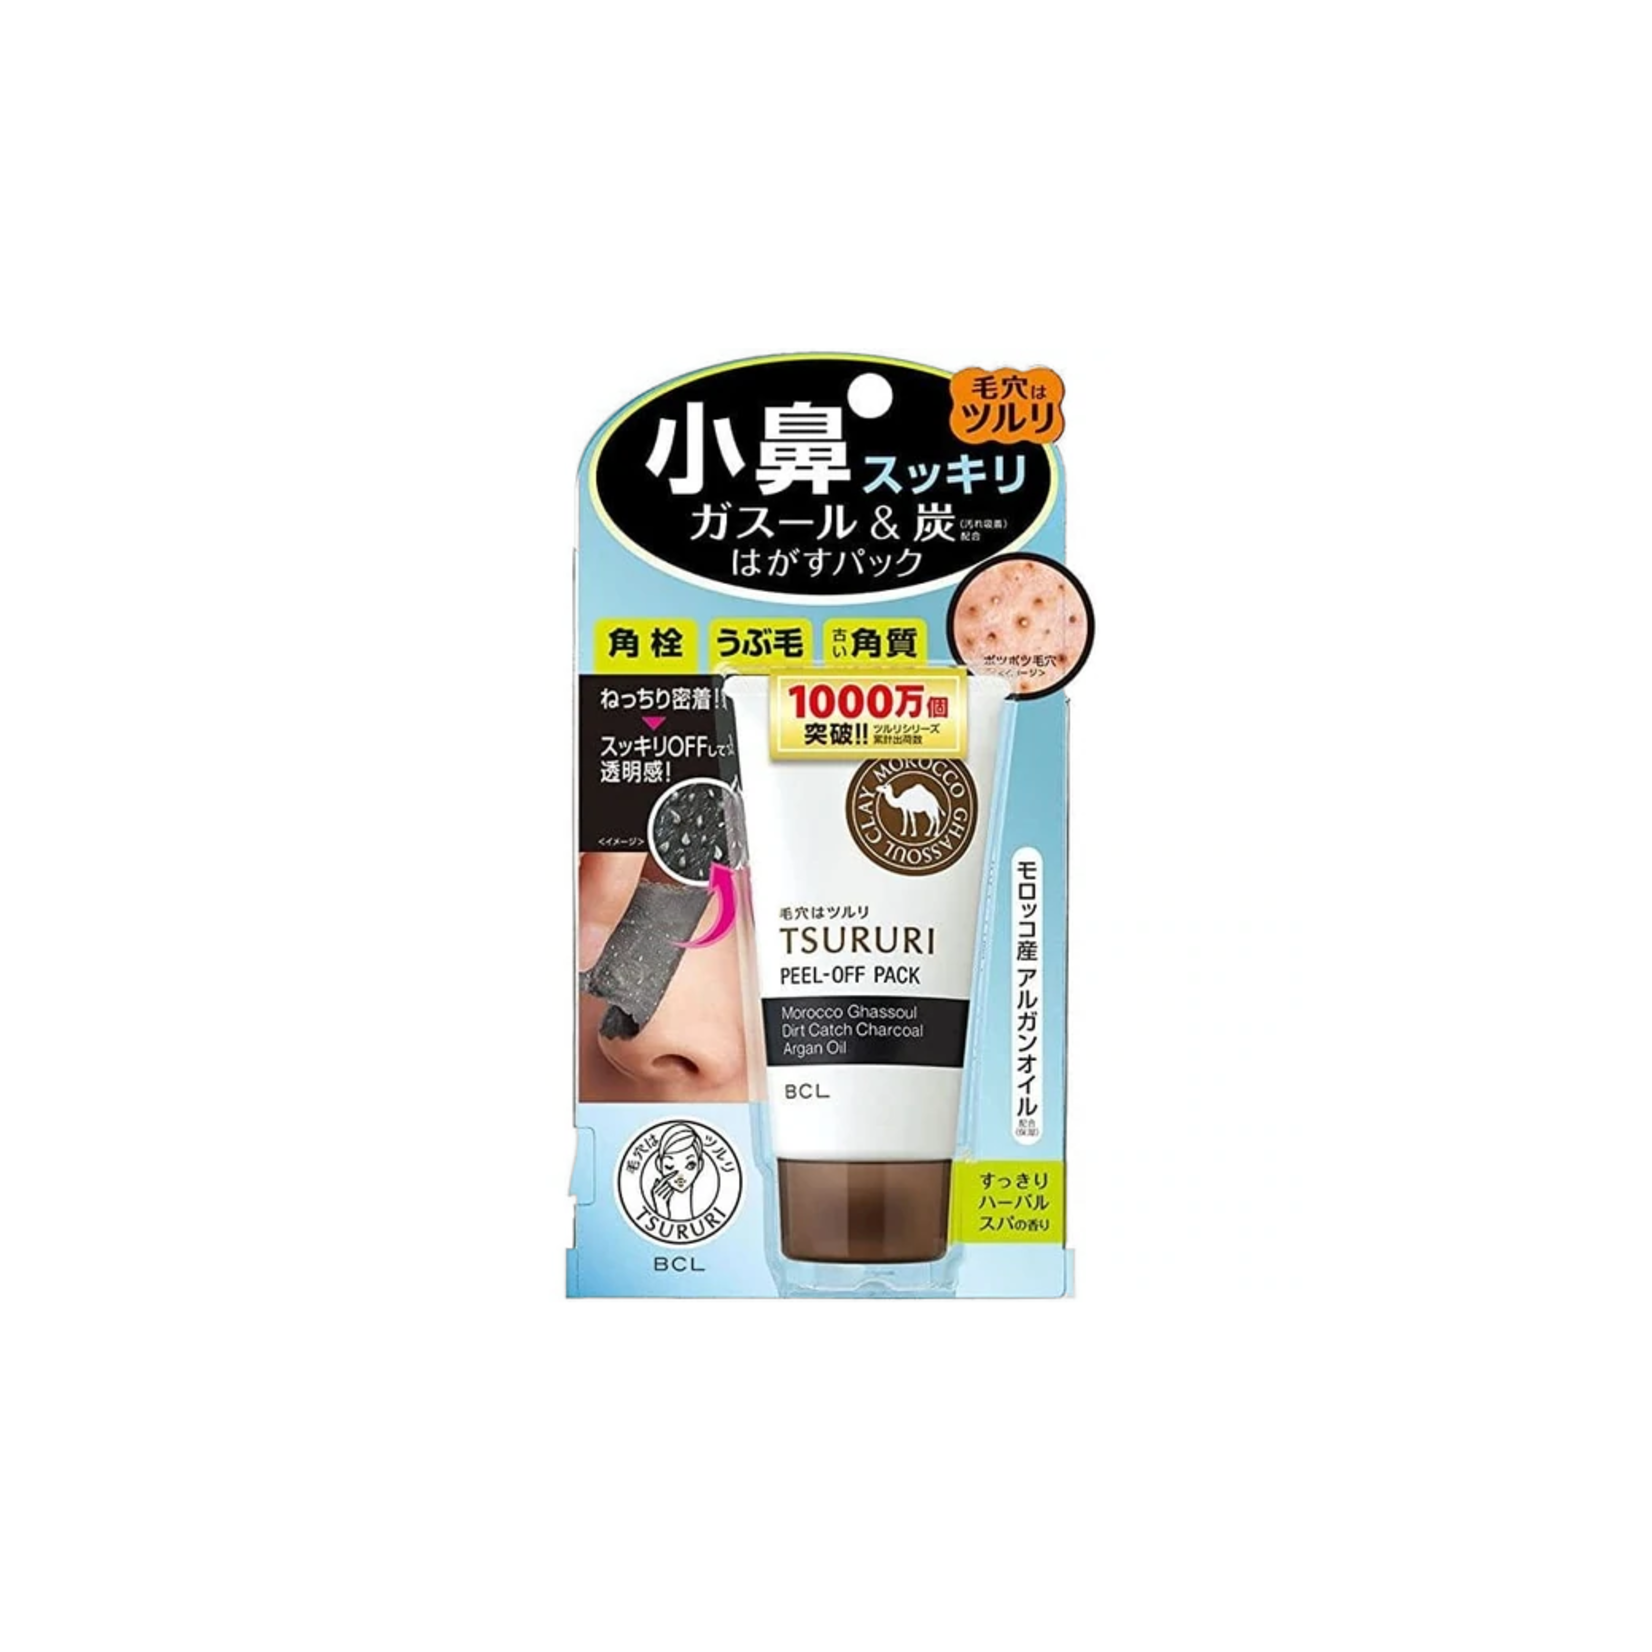 BCL BCL Tsururi Peel Off Pack For Nose Pore